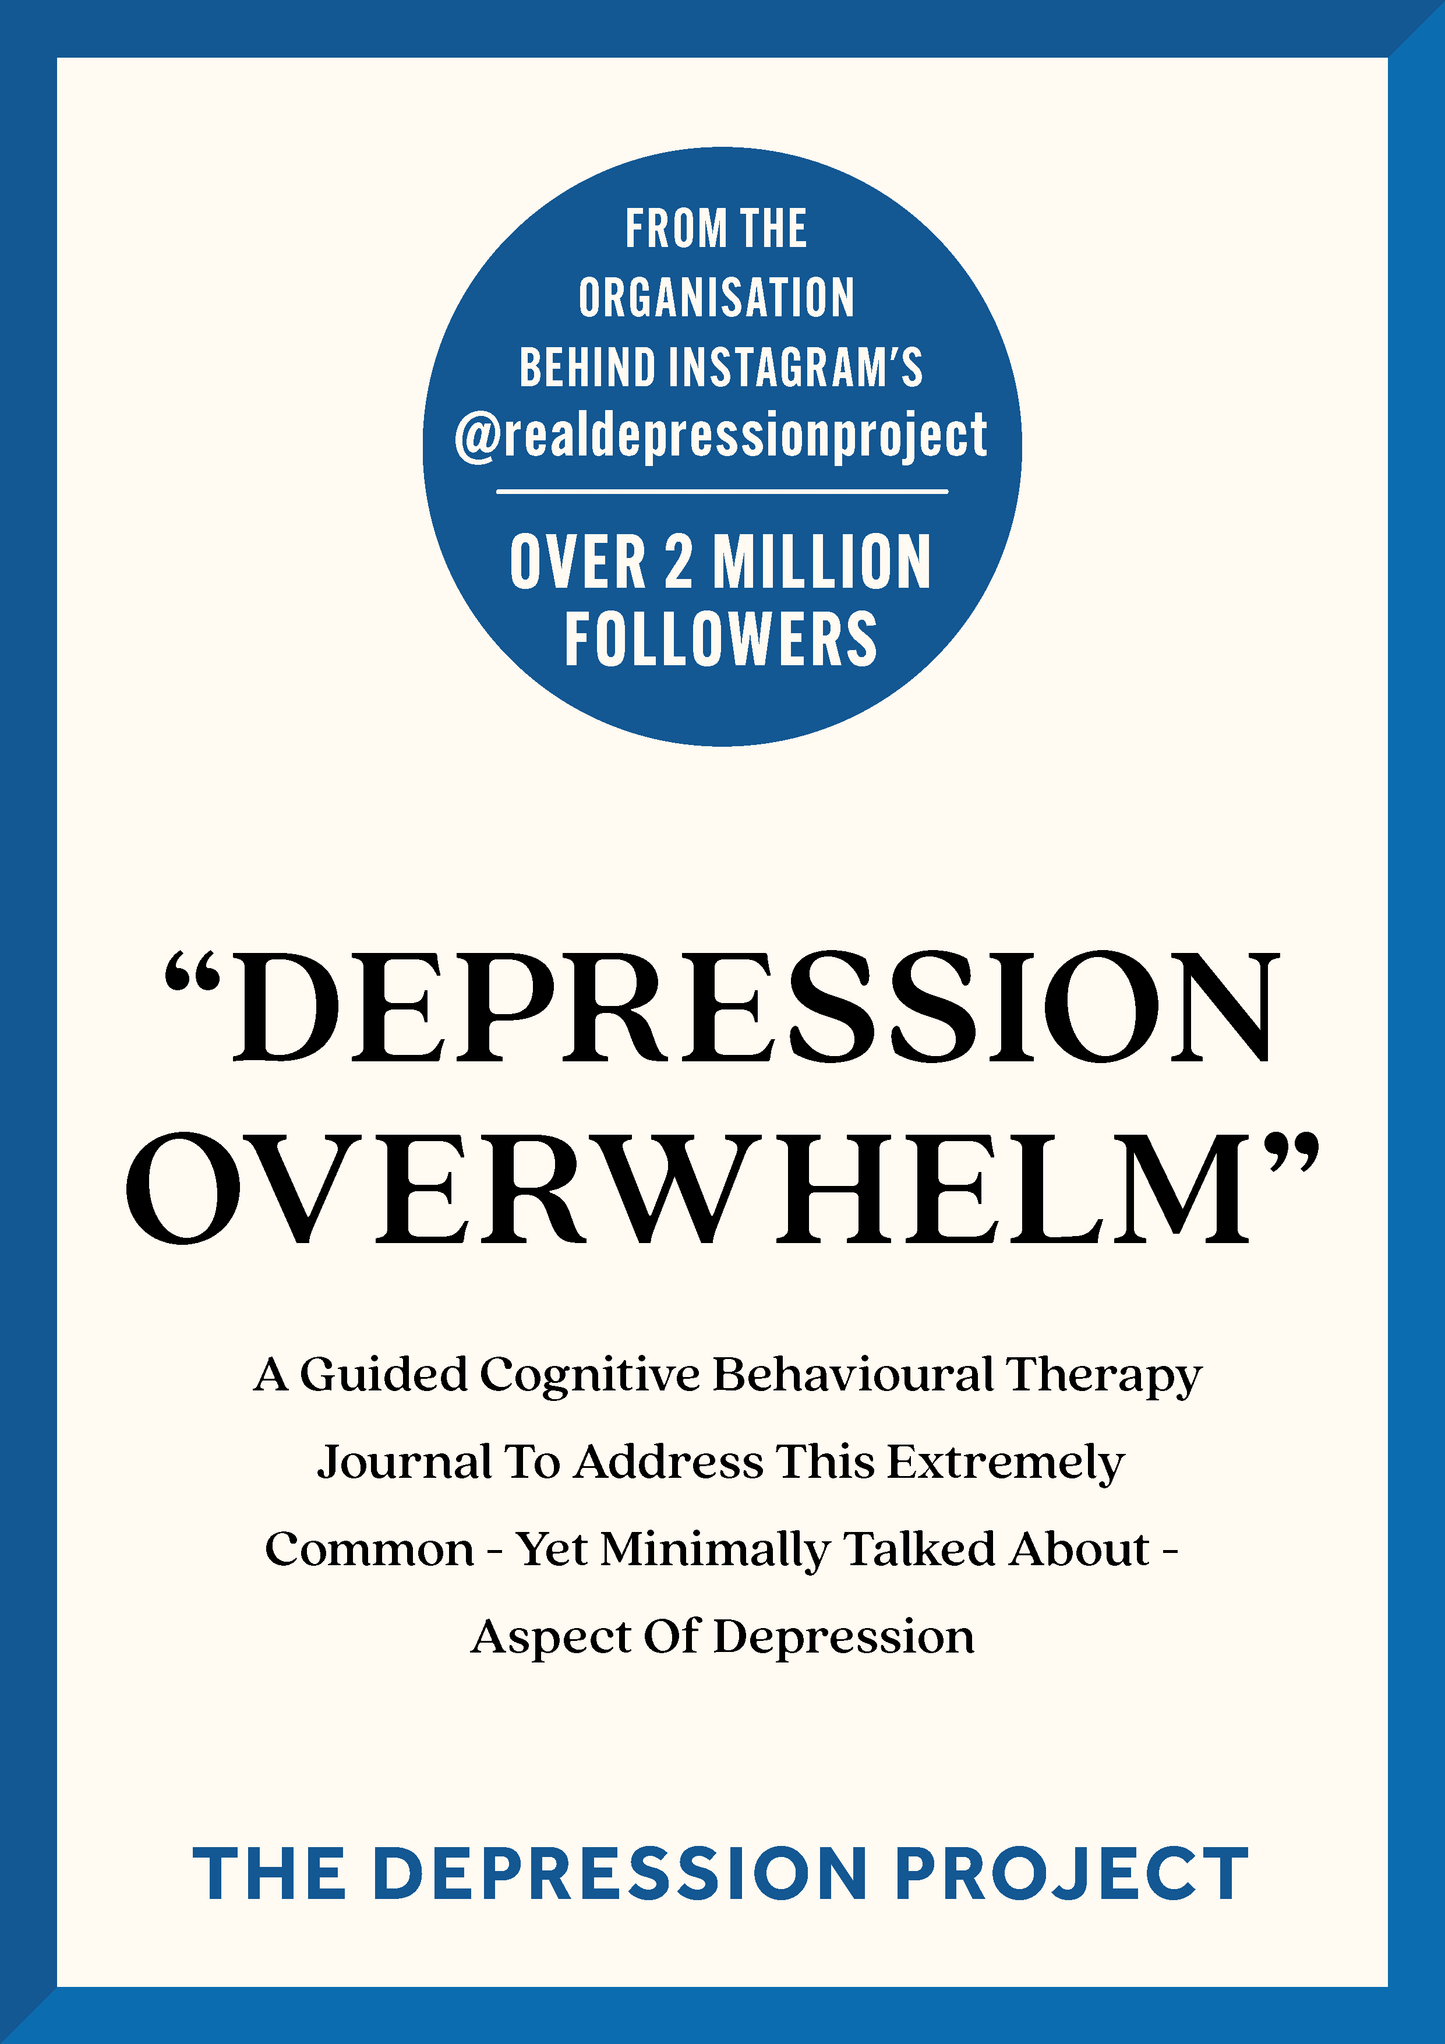 The "Depression Overwhelm" Journal - The Depression Project